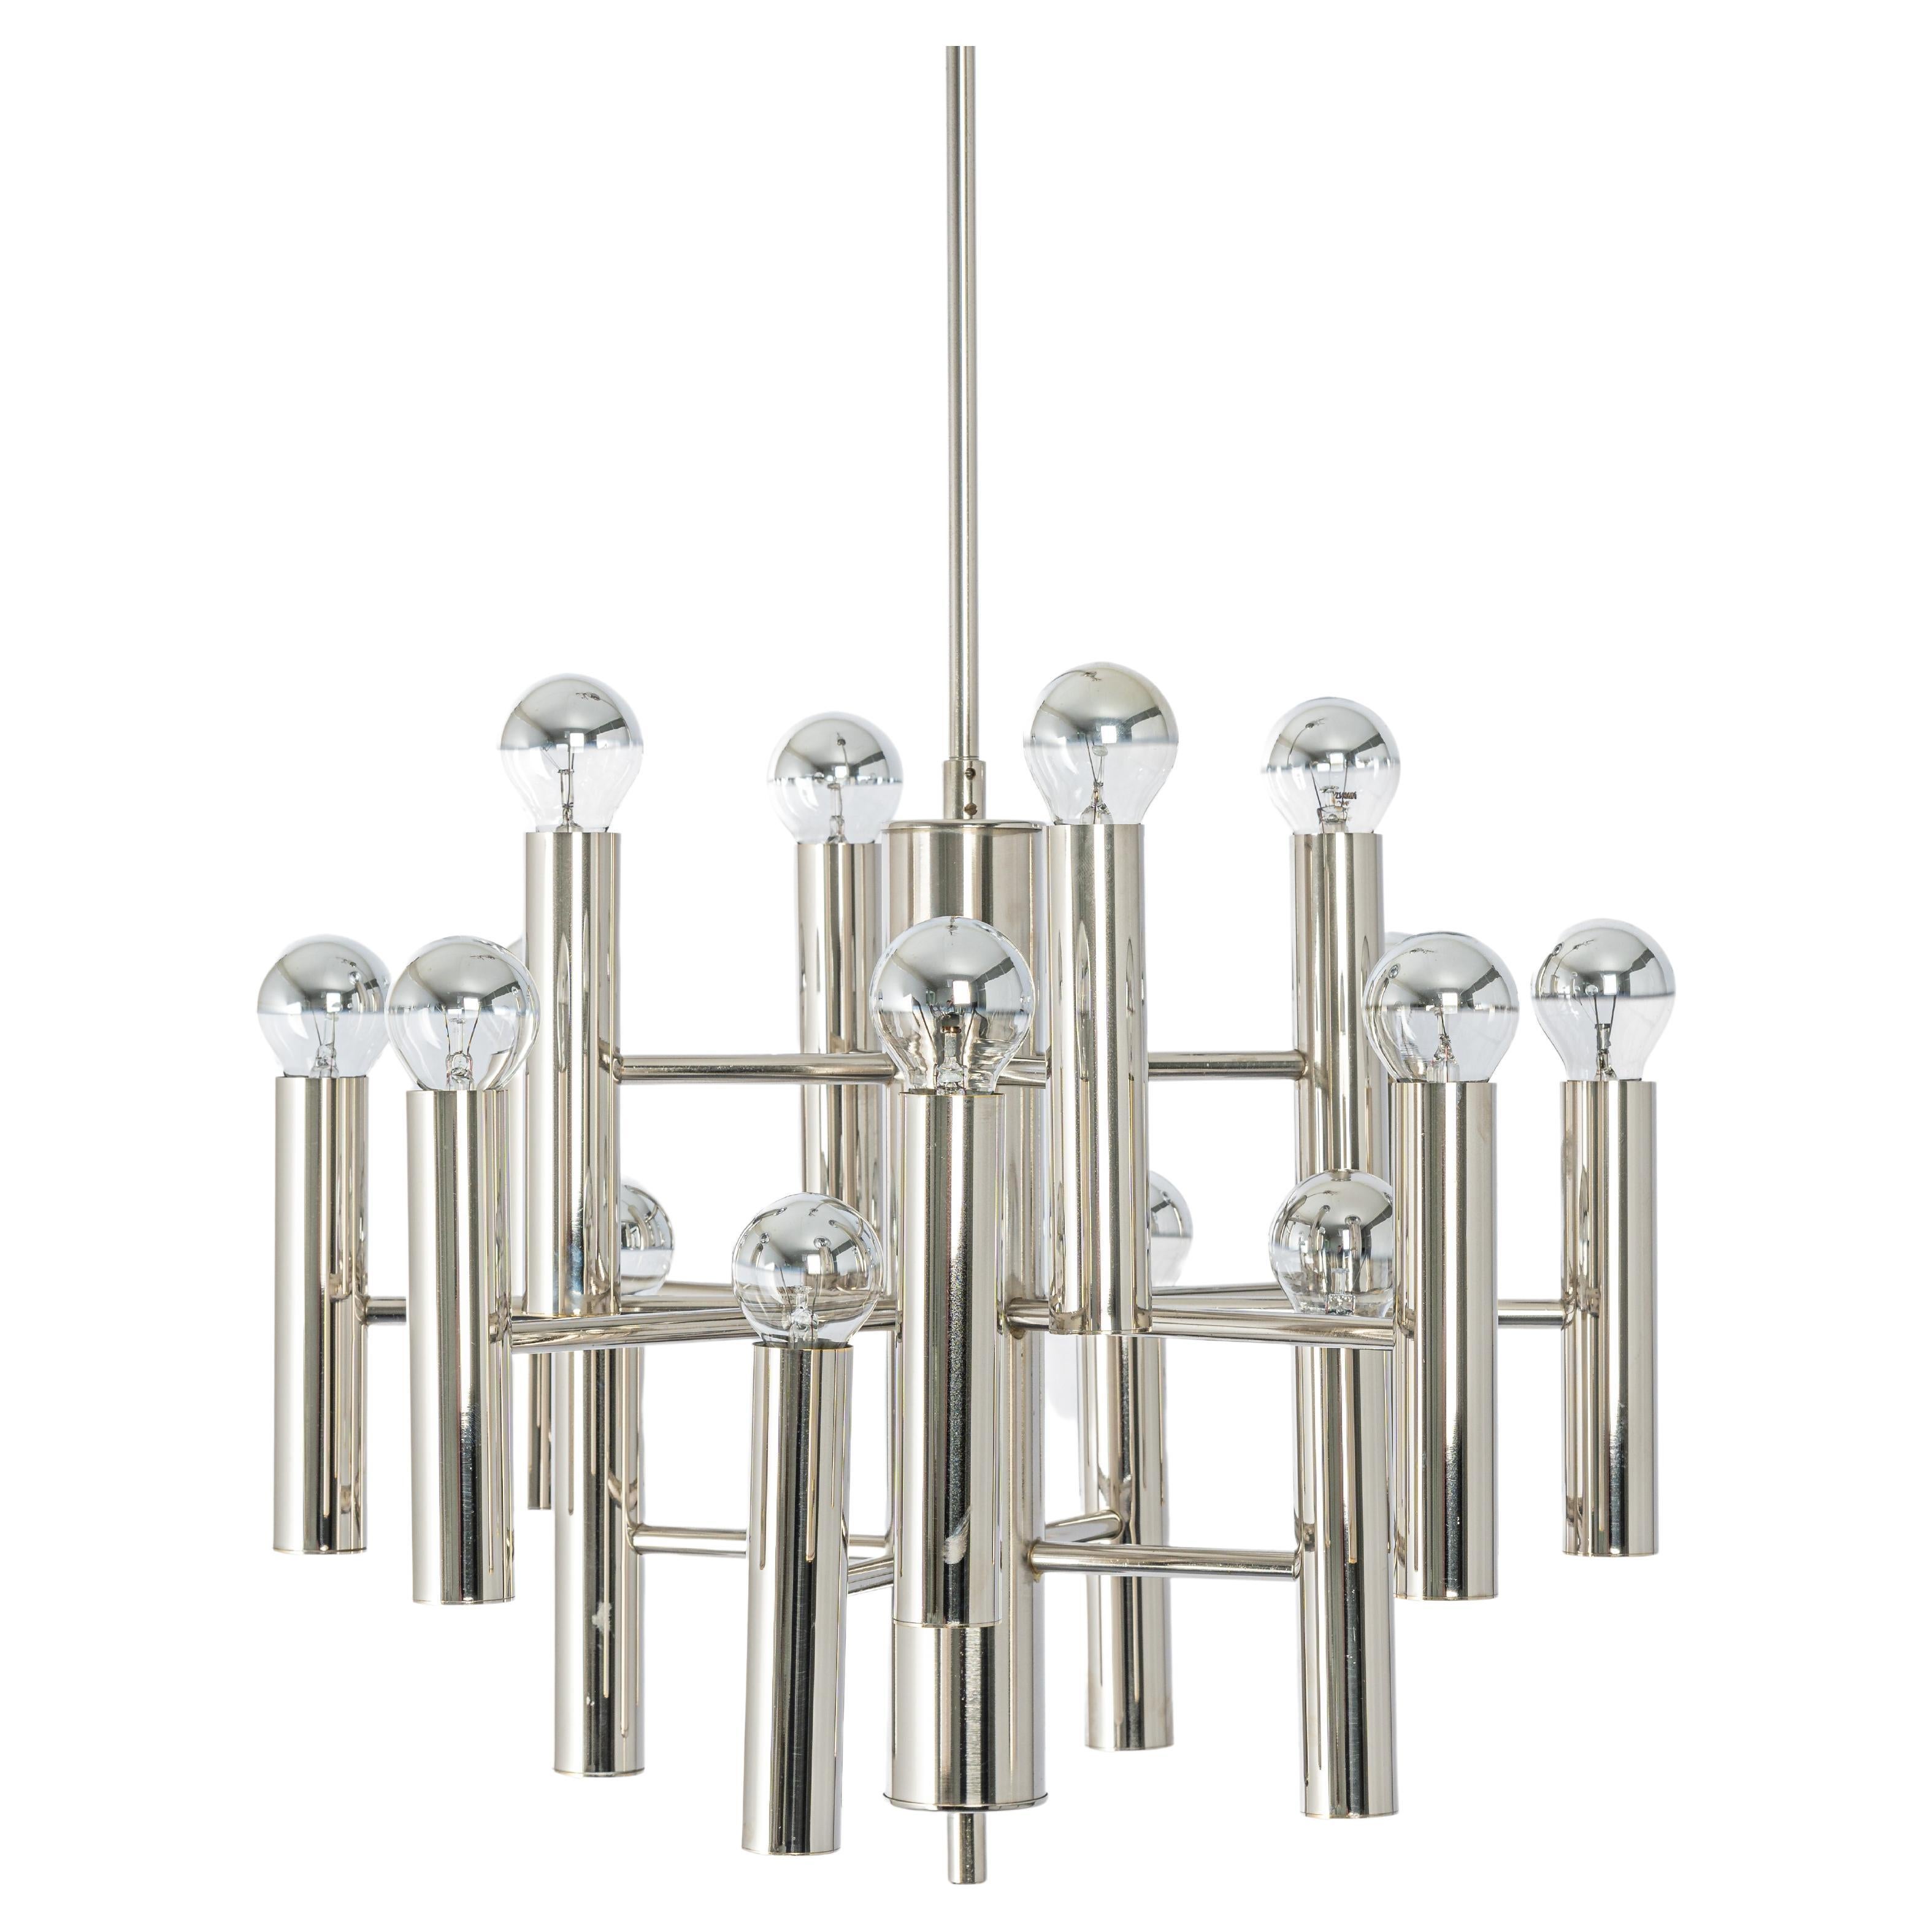 Large Chrome Space Age Sputnik Atomium Chandelier by Cosack, Germany, 1970s